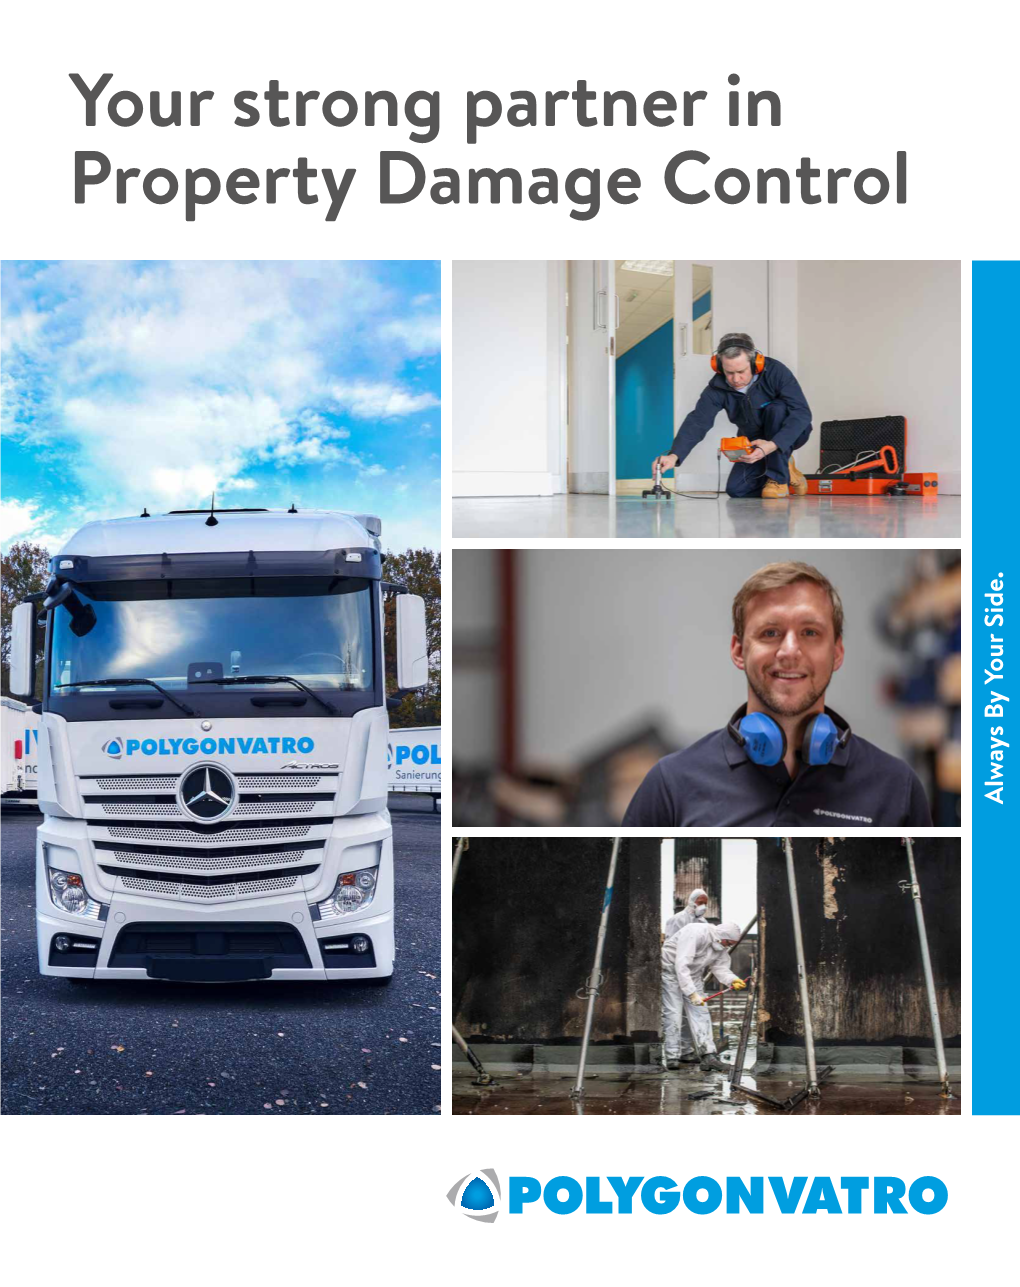 Your Strong Partner in Property Damage Control Always by Your Side